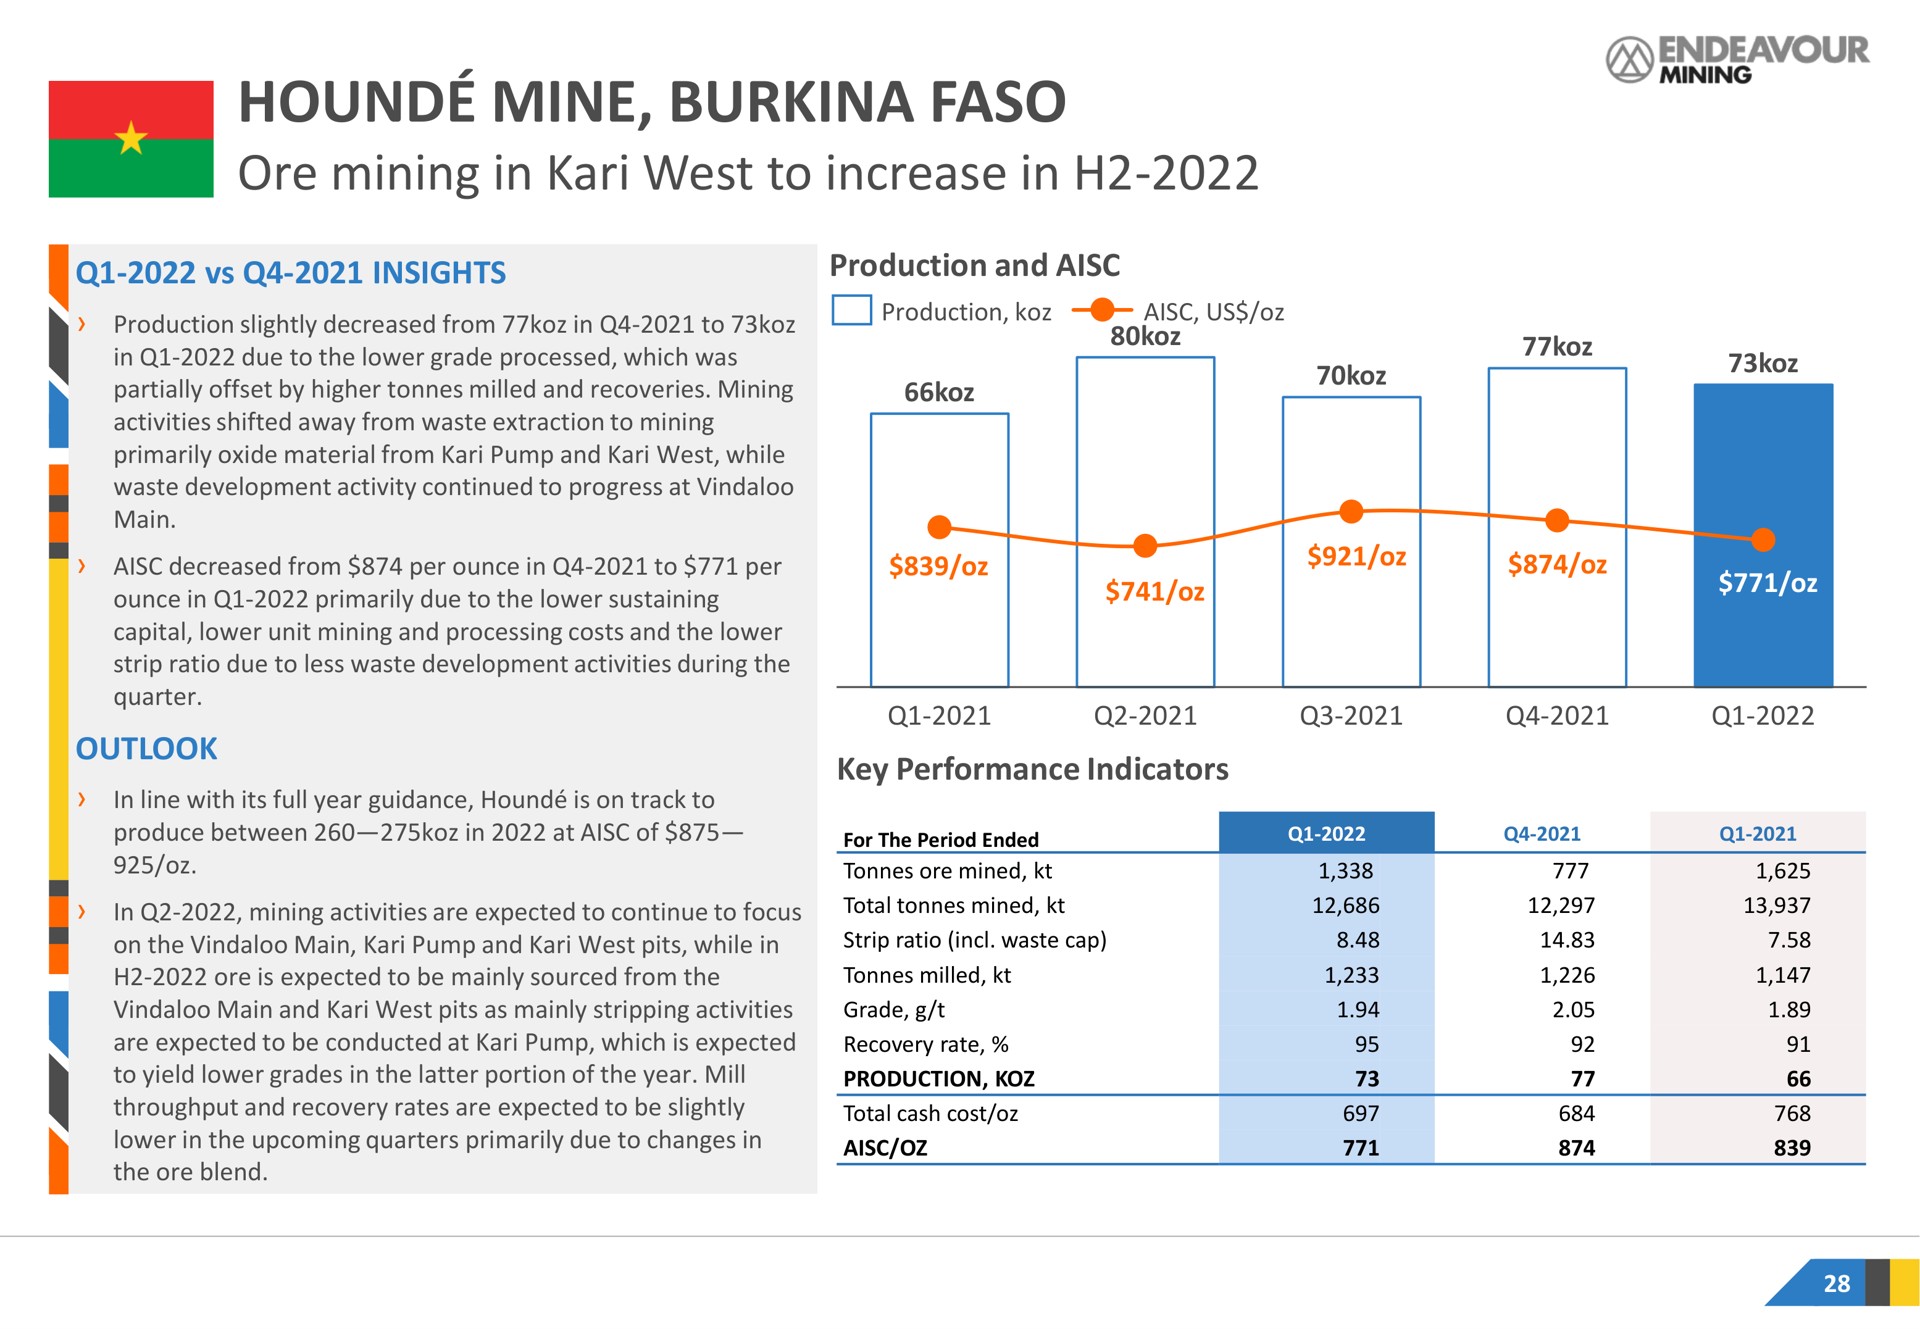 hound mine ore mining in west to increase in | Endeavour Mining